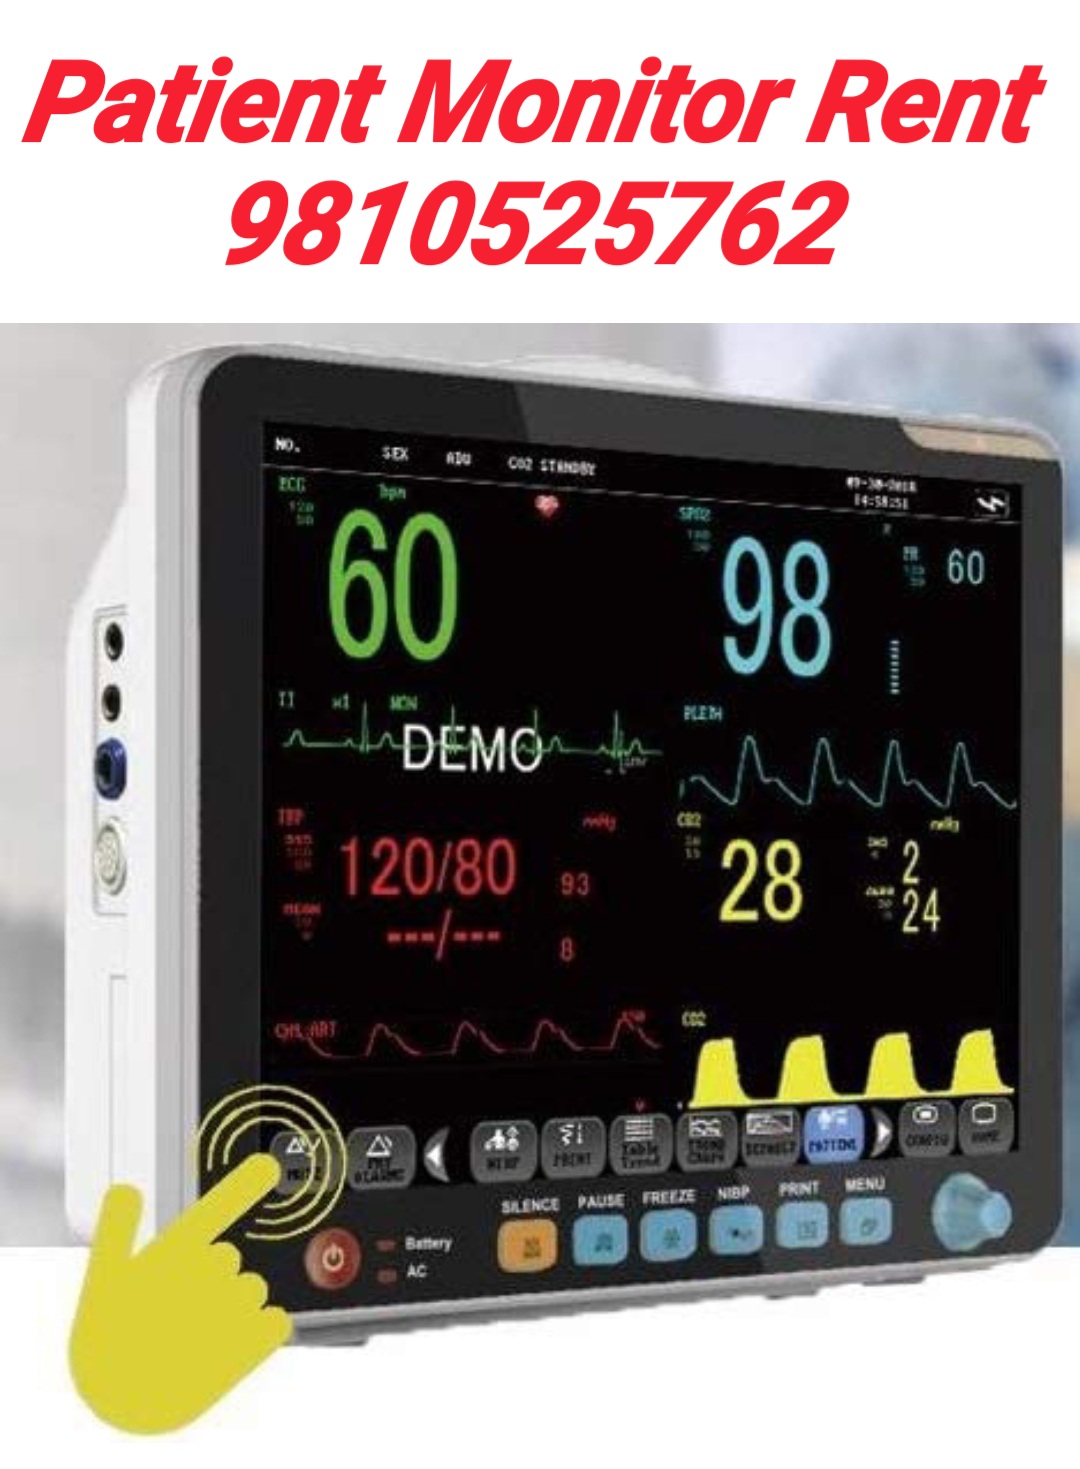 TOP PATIENT MONITORING SYSTEMS ON RENT IN EAST DELHI 9810525762